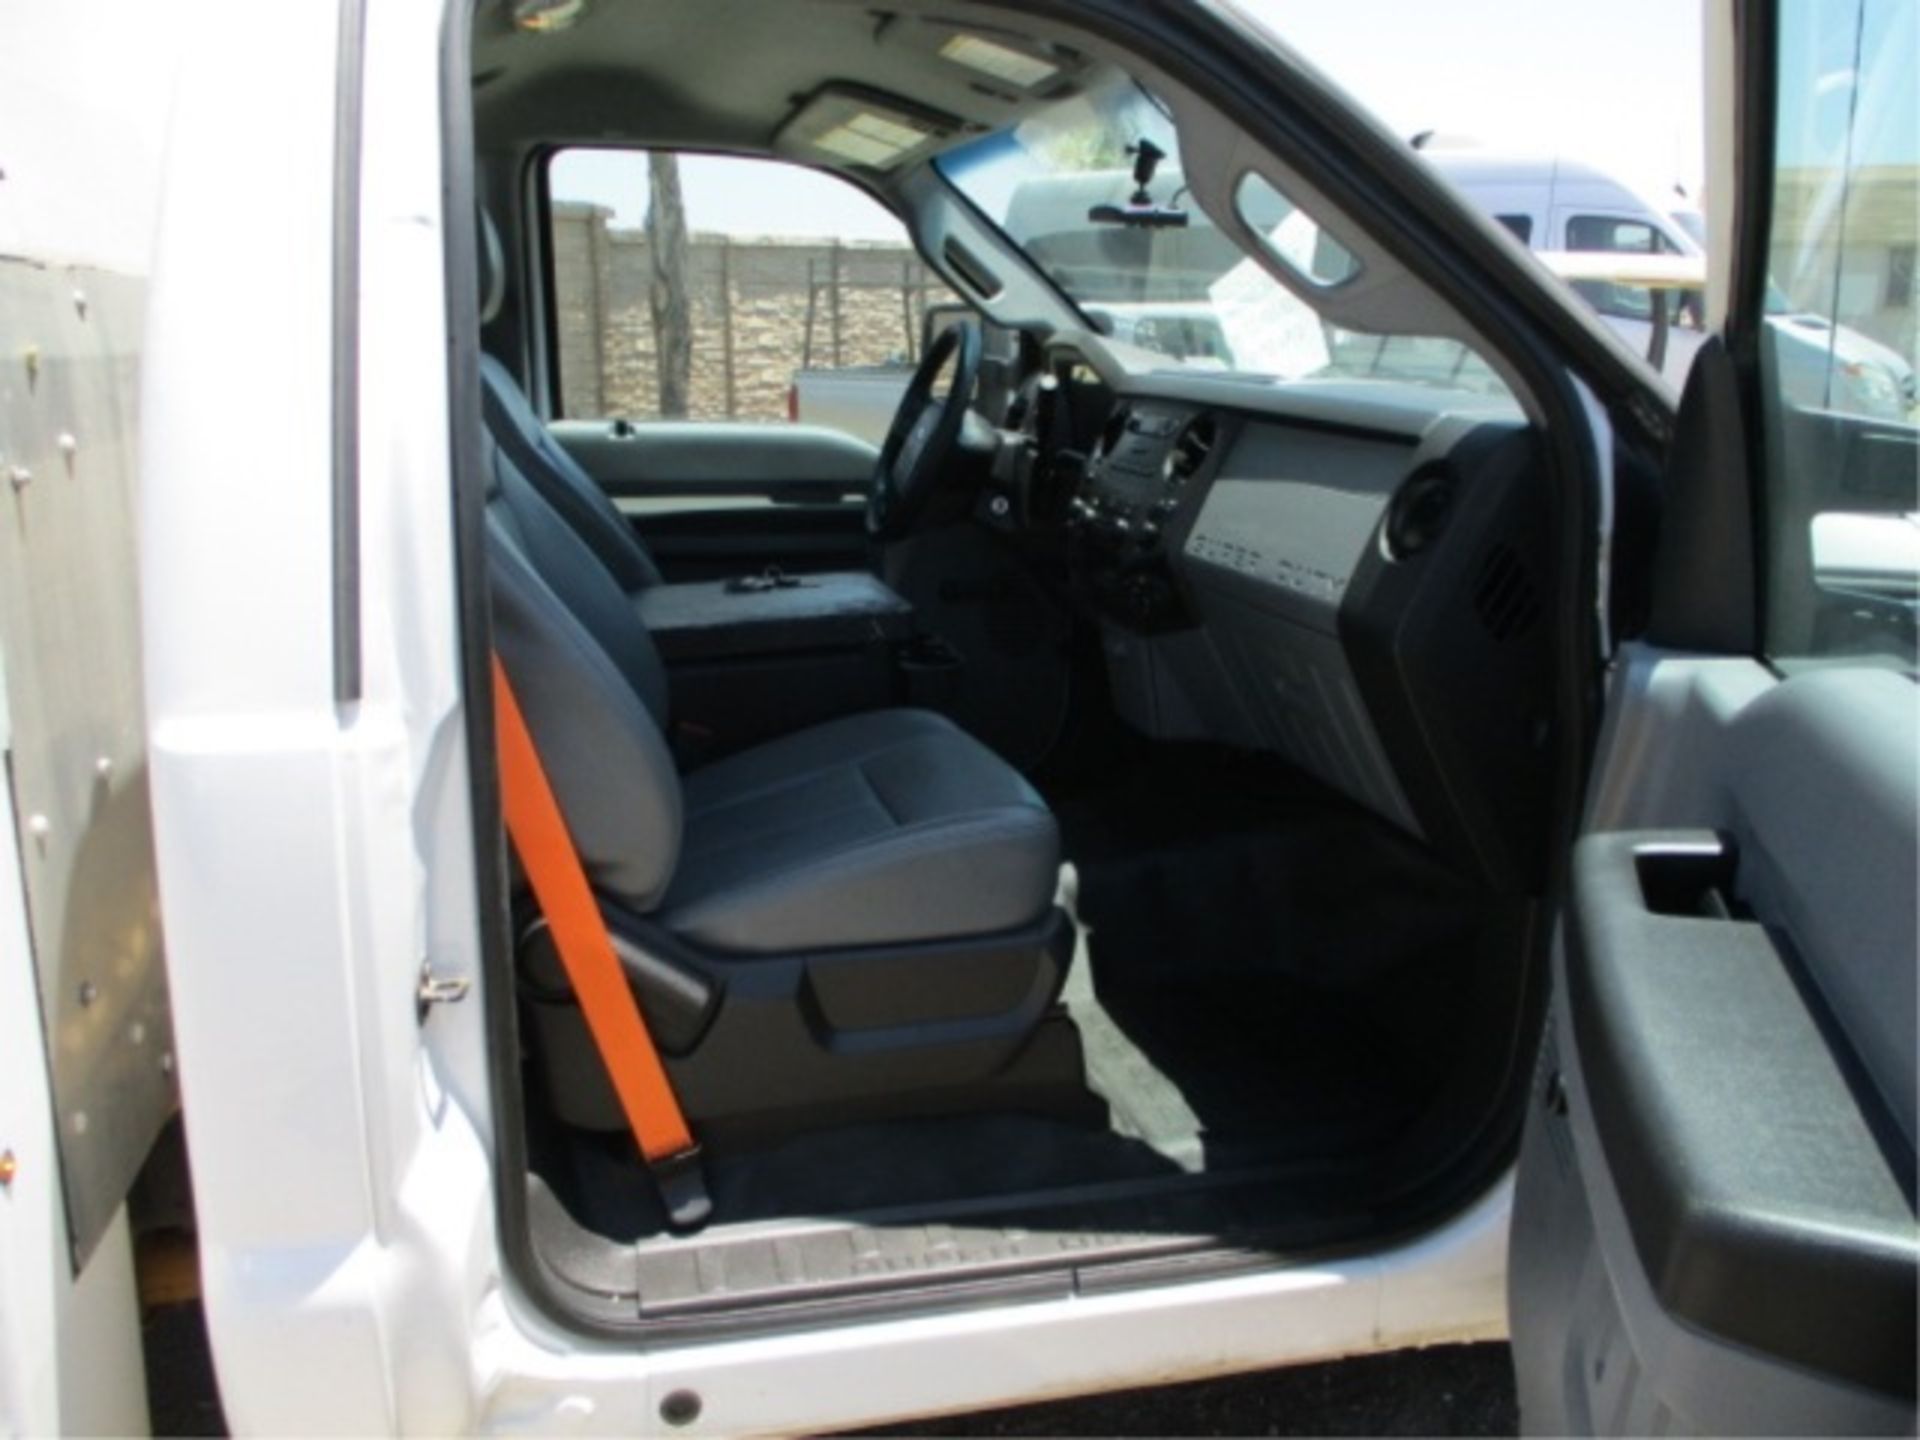 2013 Ford F350 SD Utility Truck, 6.2L V8 Gas, Automatic, Enclosed Utility Body, Onan Gas - Image 62 of 84